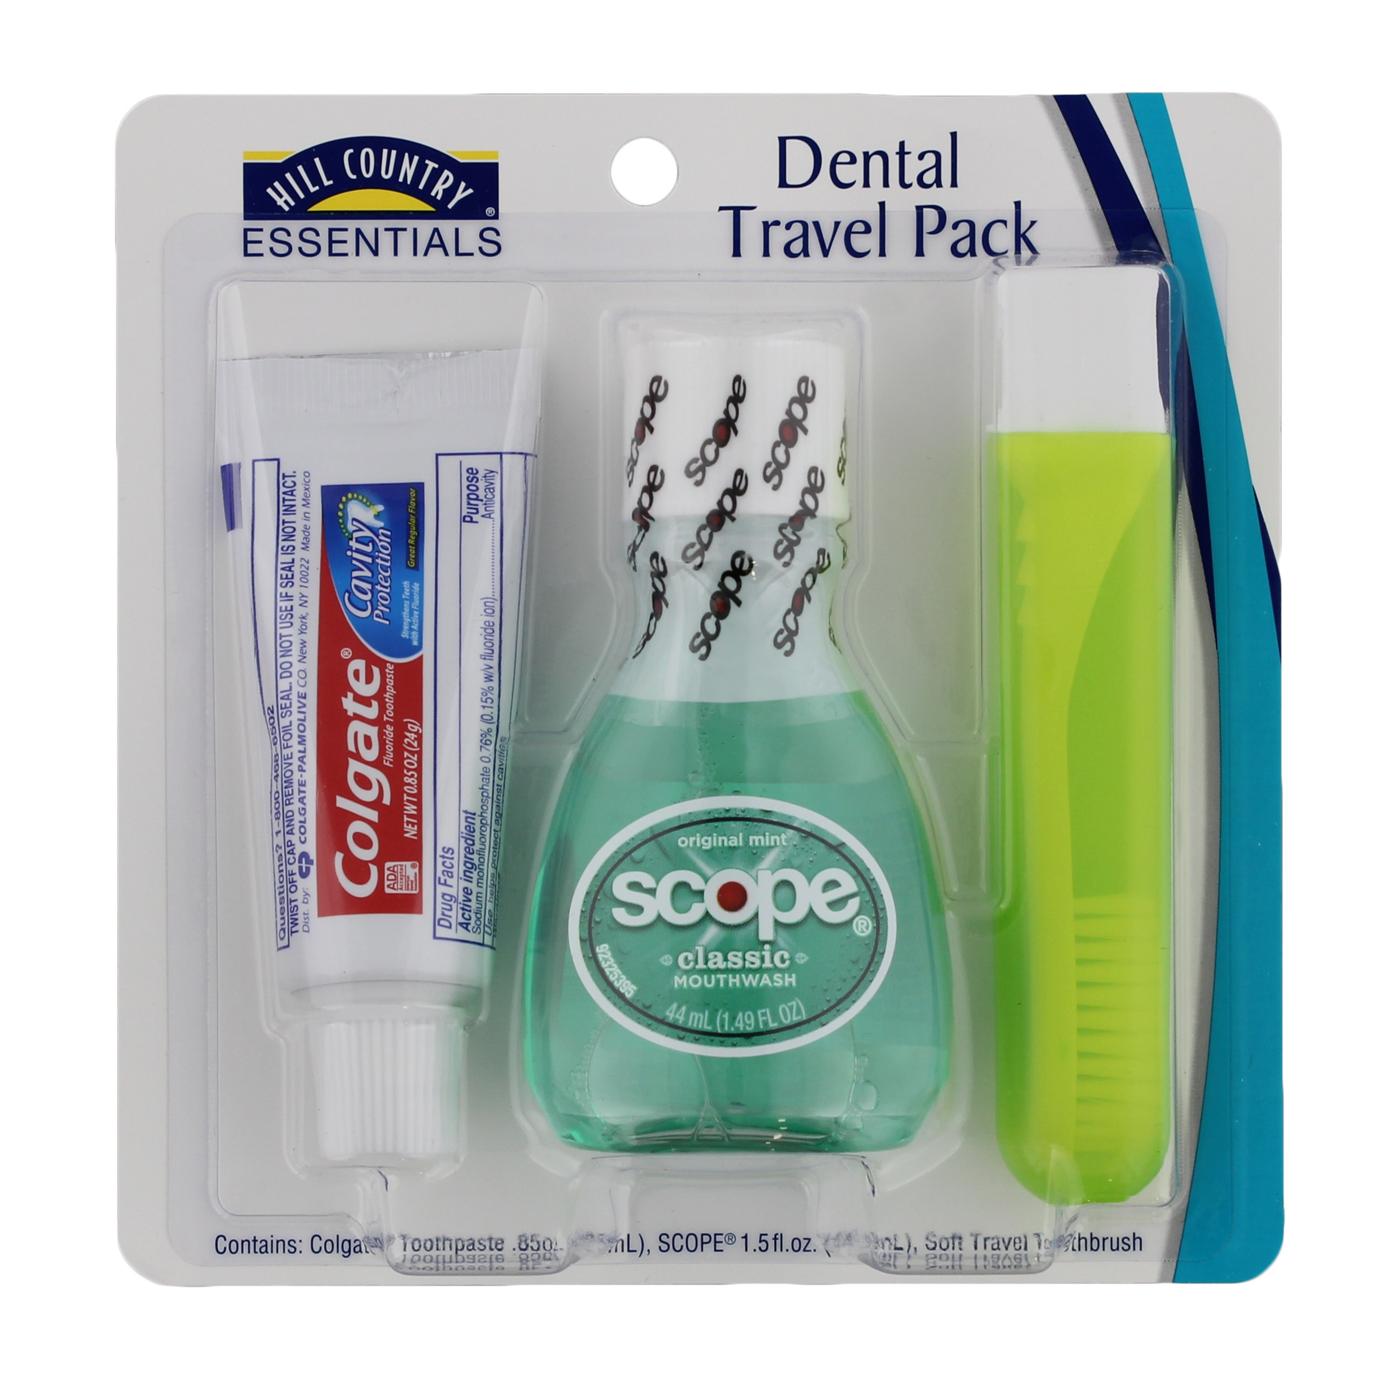 Hill Country Essentials Travel Size Dental Pack - Assorted; image 2 of 5